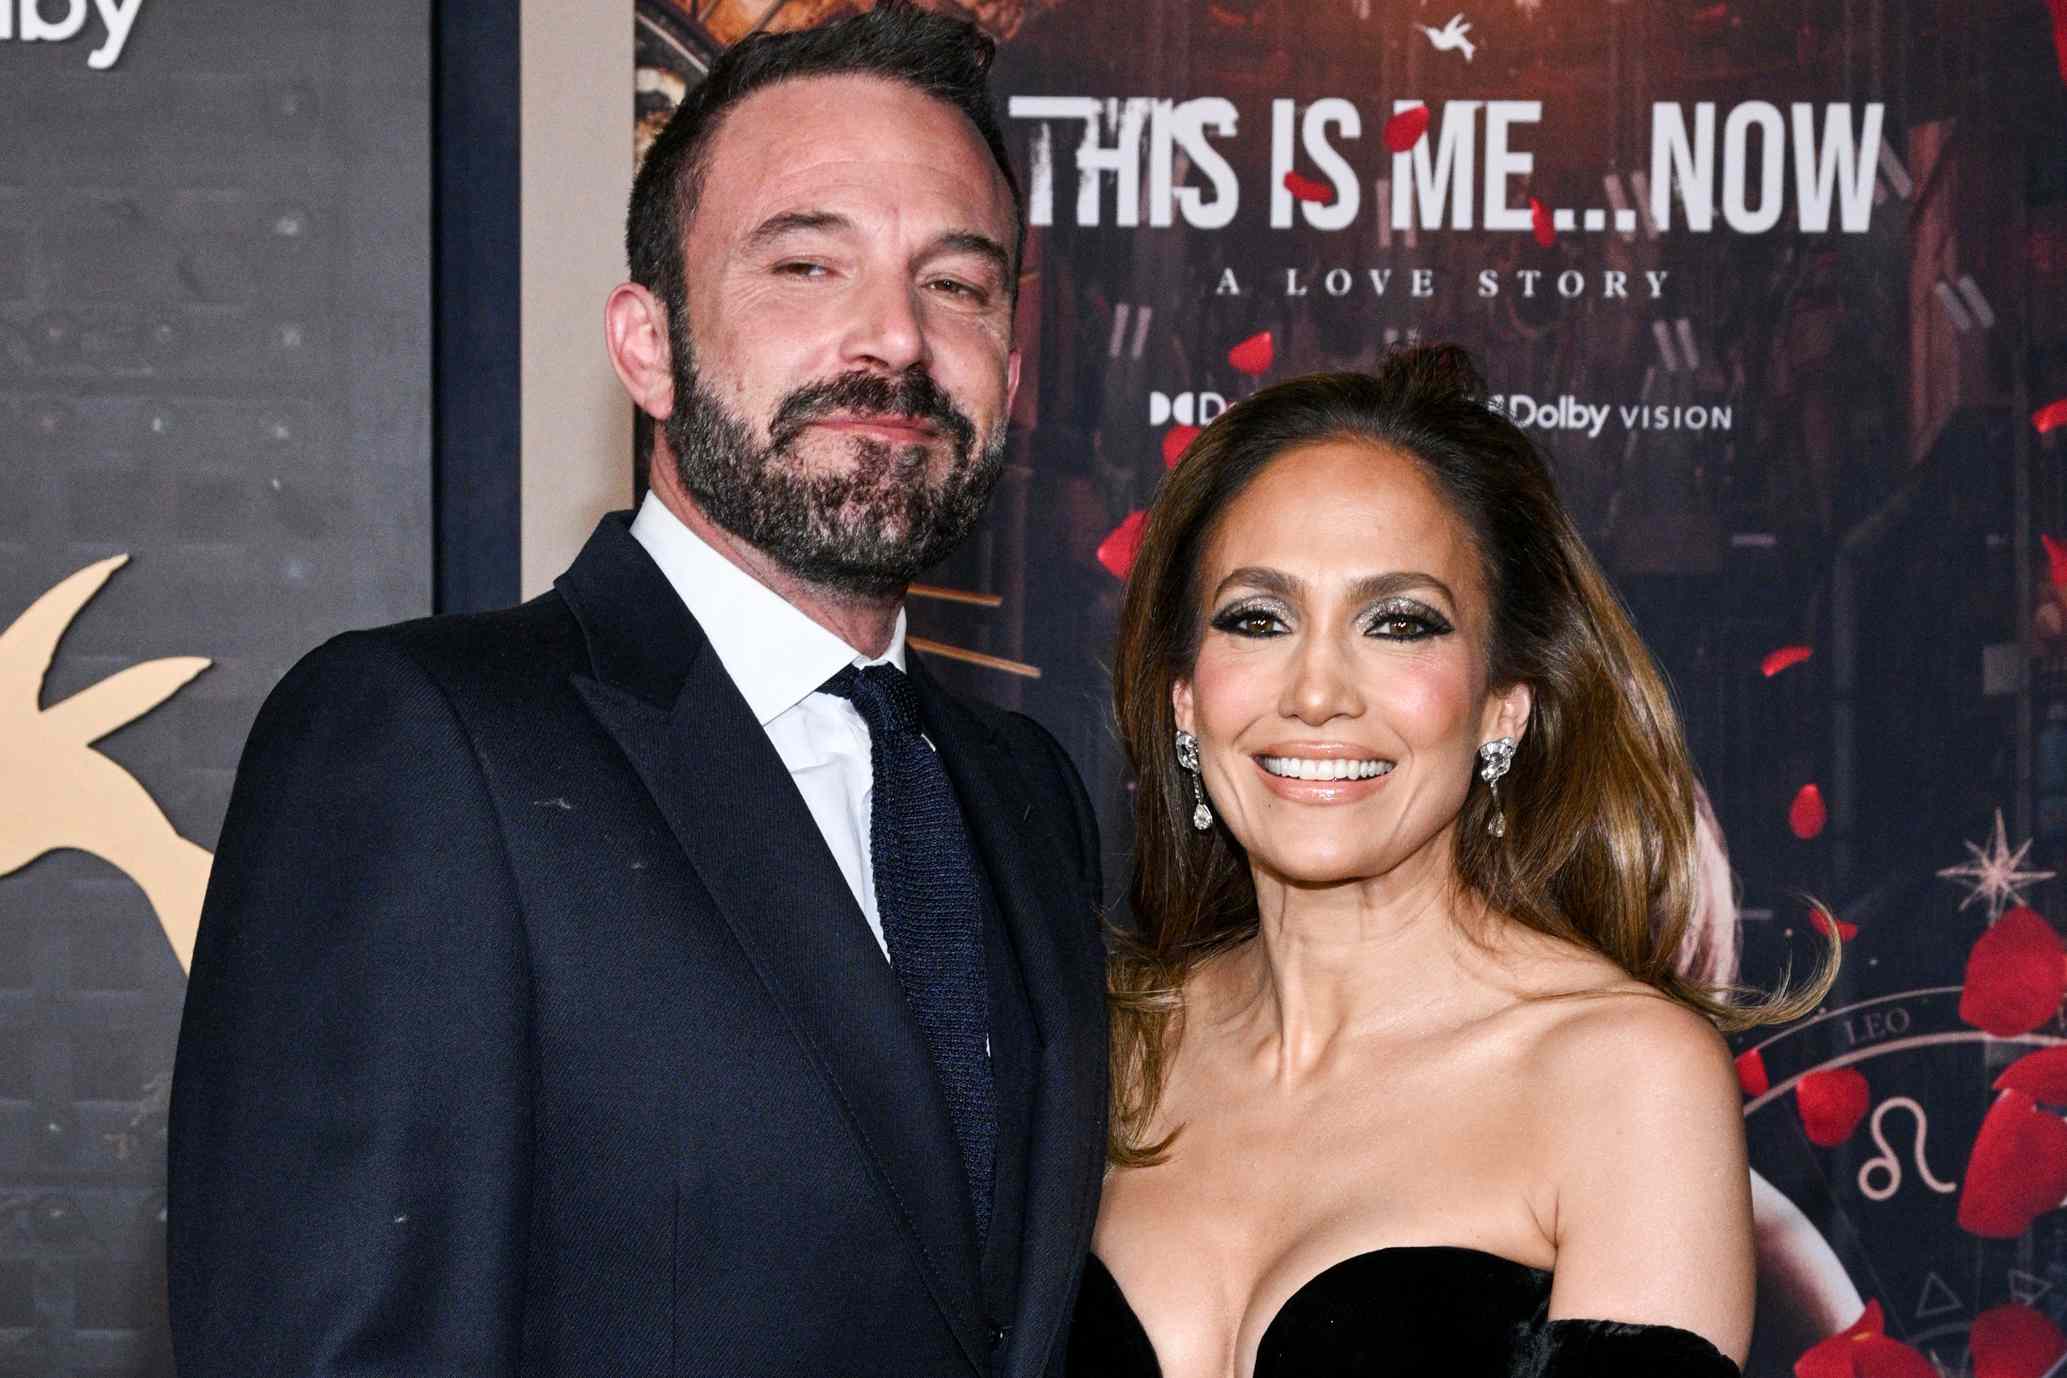 Ben Affleck and Jennifer Lopez Photographed Together for First Time in 47 Days, Wearing Wedding Rings